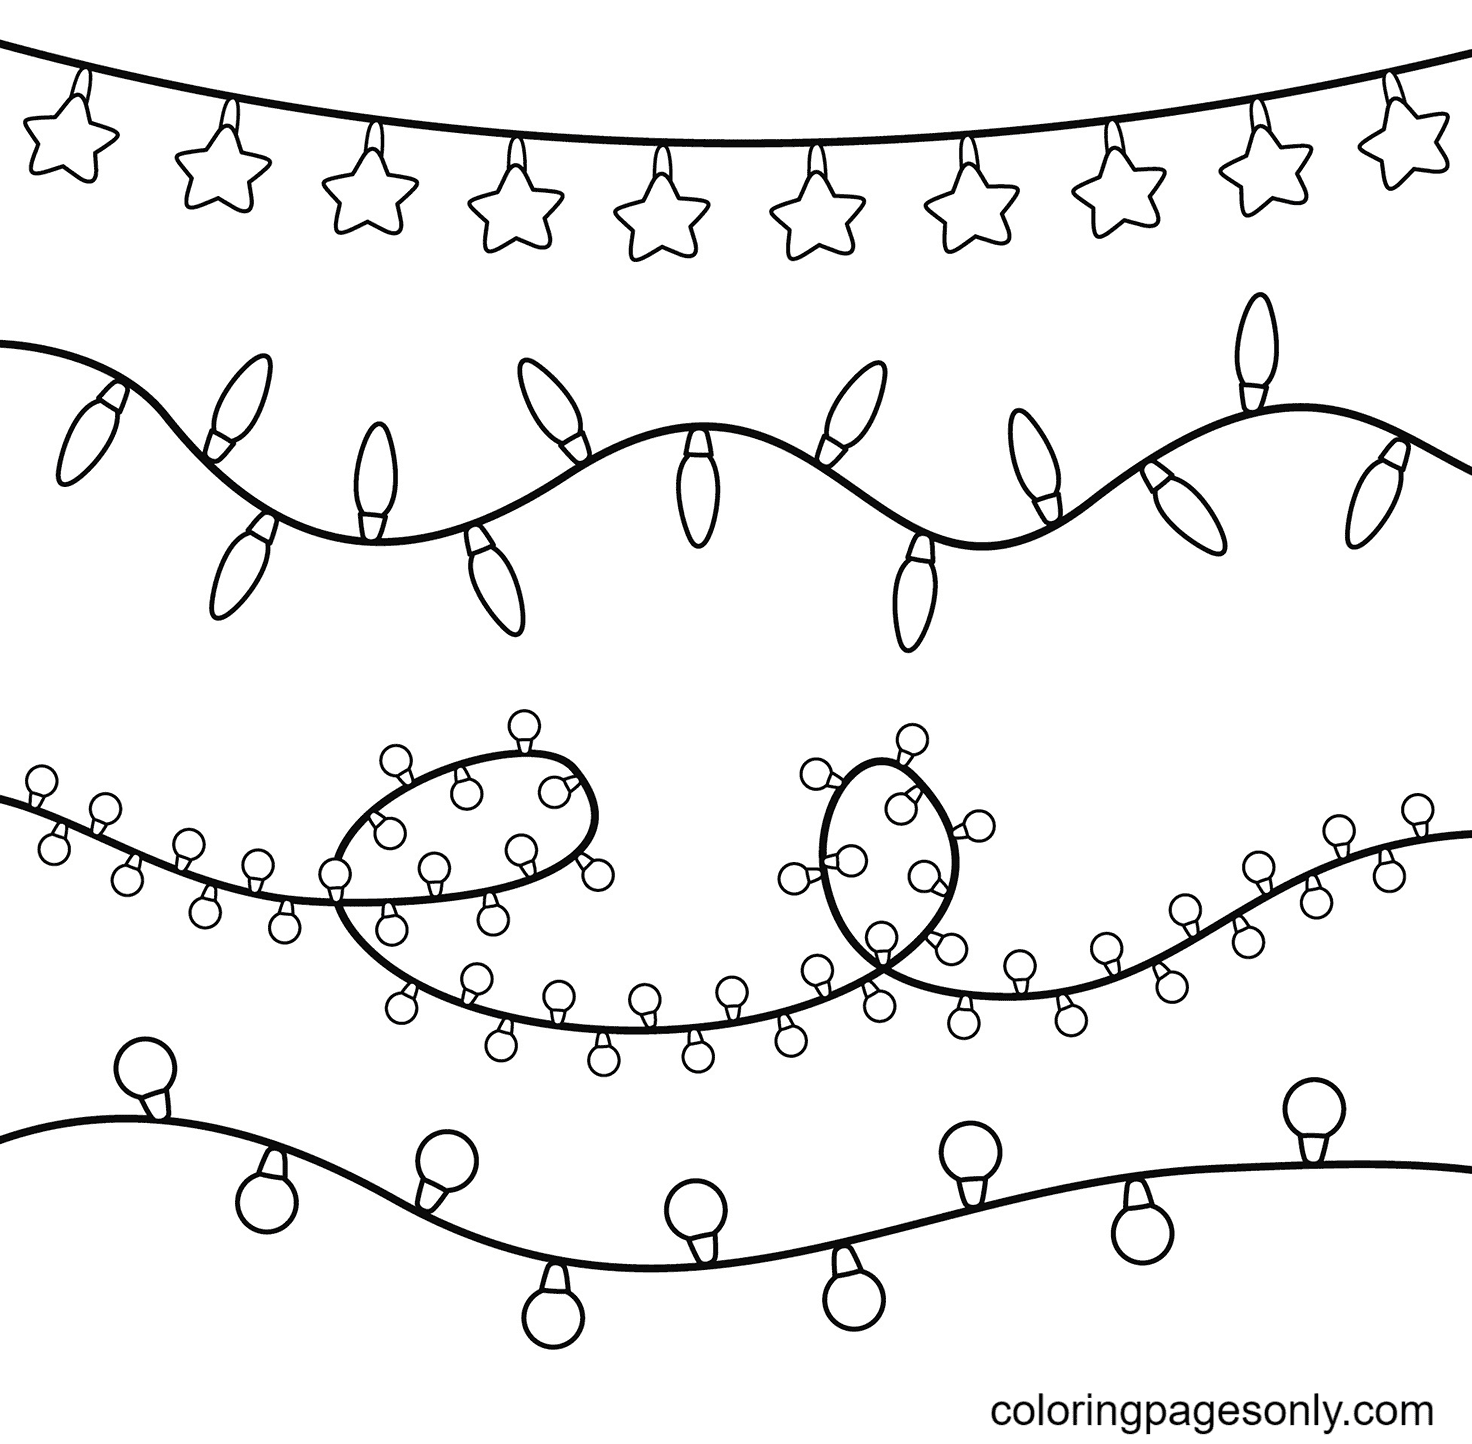 Christmas Lights Great Image Coloring Page